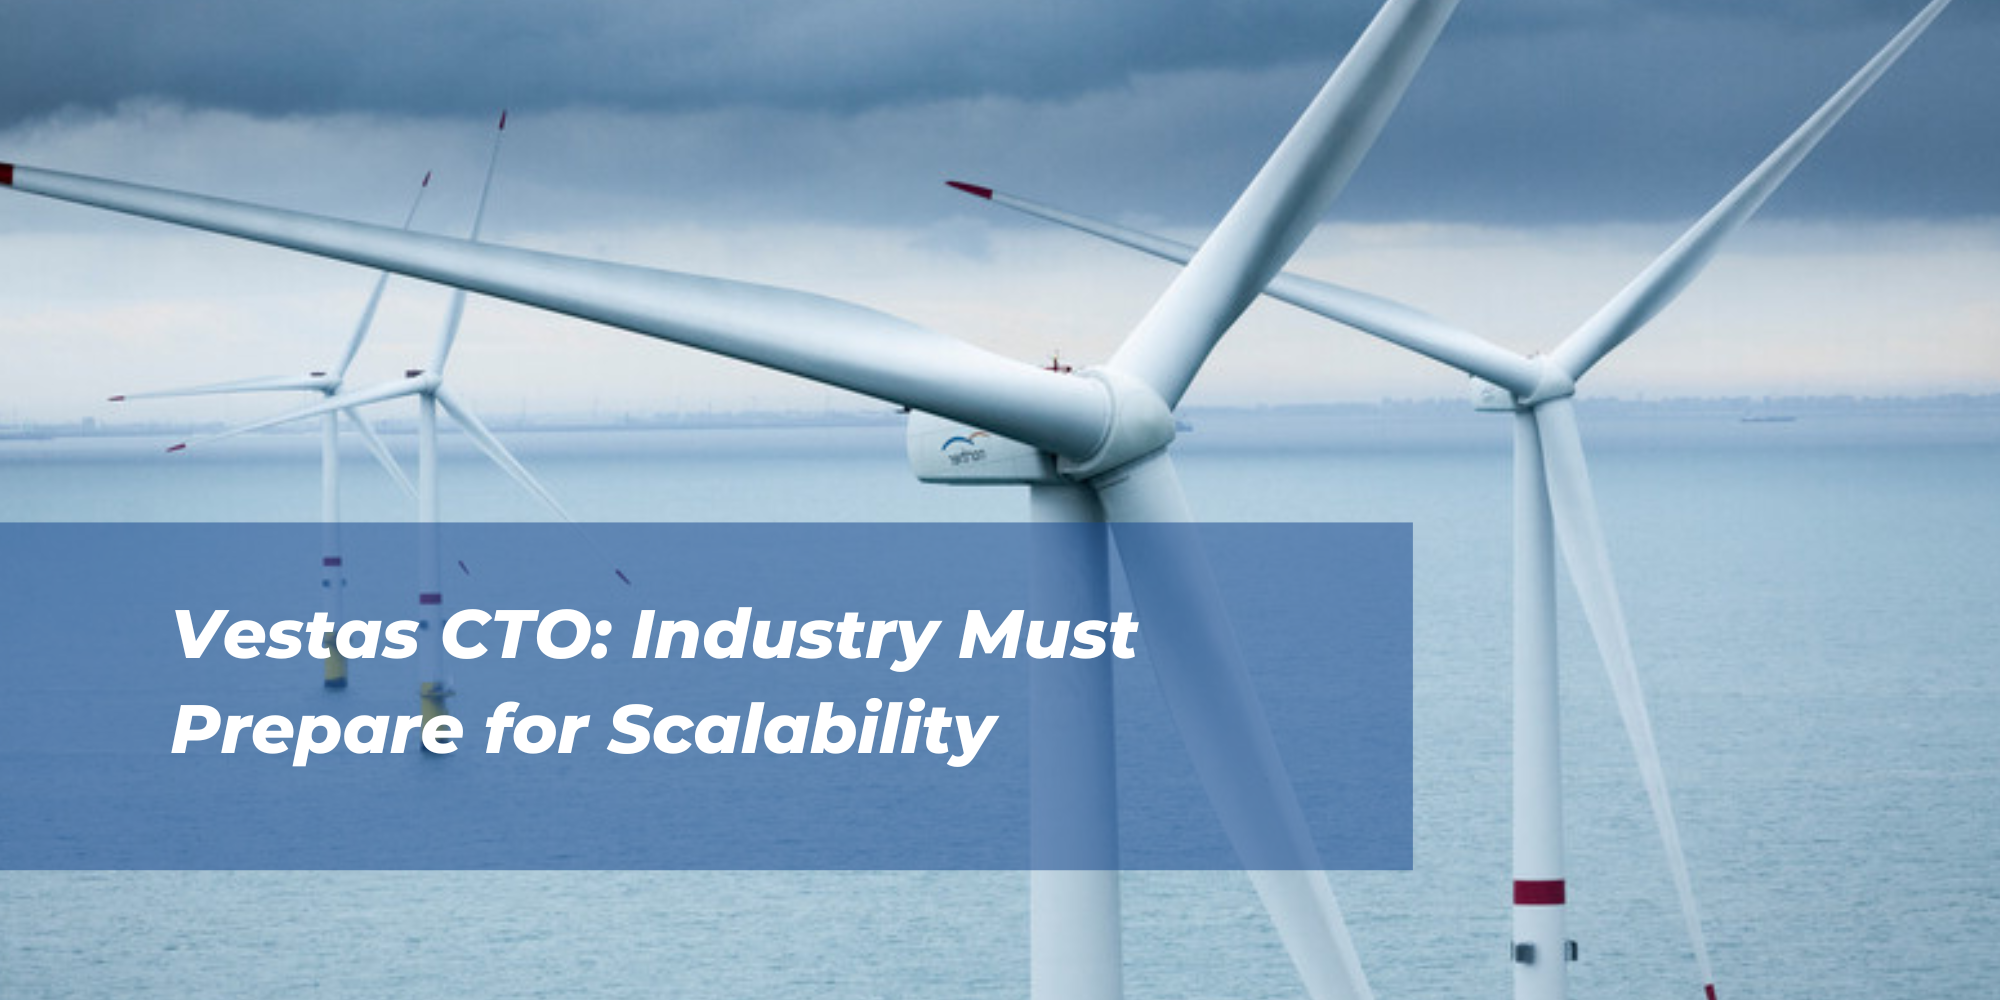 Vestas CTO says OEMs Must Focus on Optimizing Existing Tech in Order to Scale